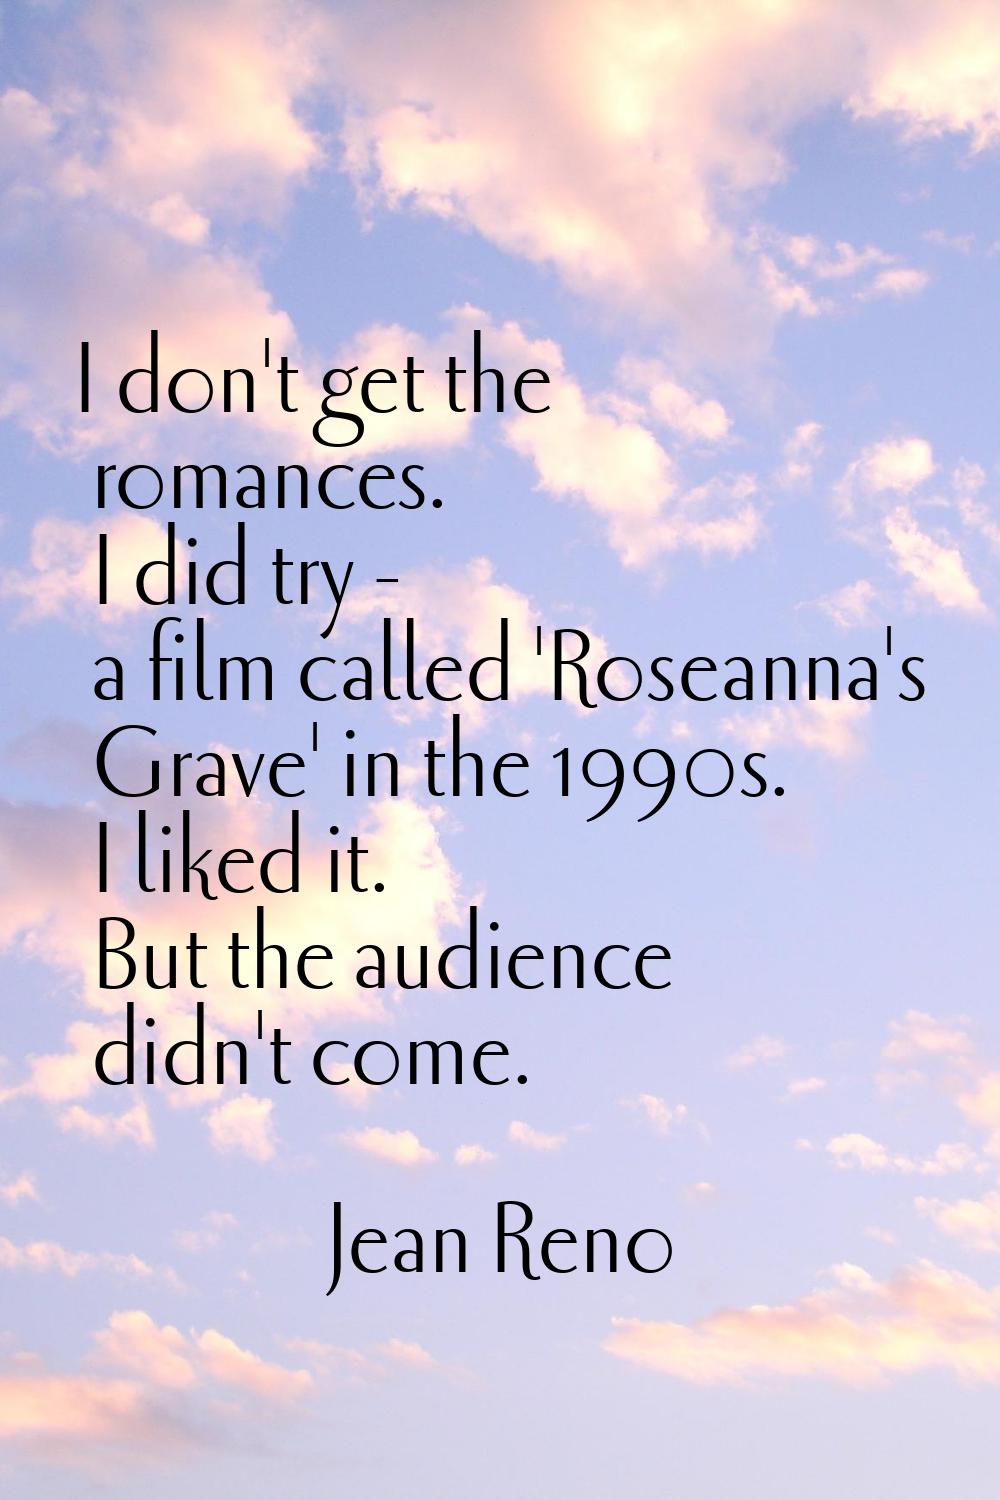 I don't get the romances. I did try - a film called 'Roseanna's Grave' in the 1990s. I liked it. Bu